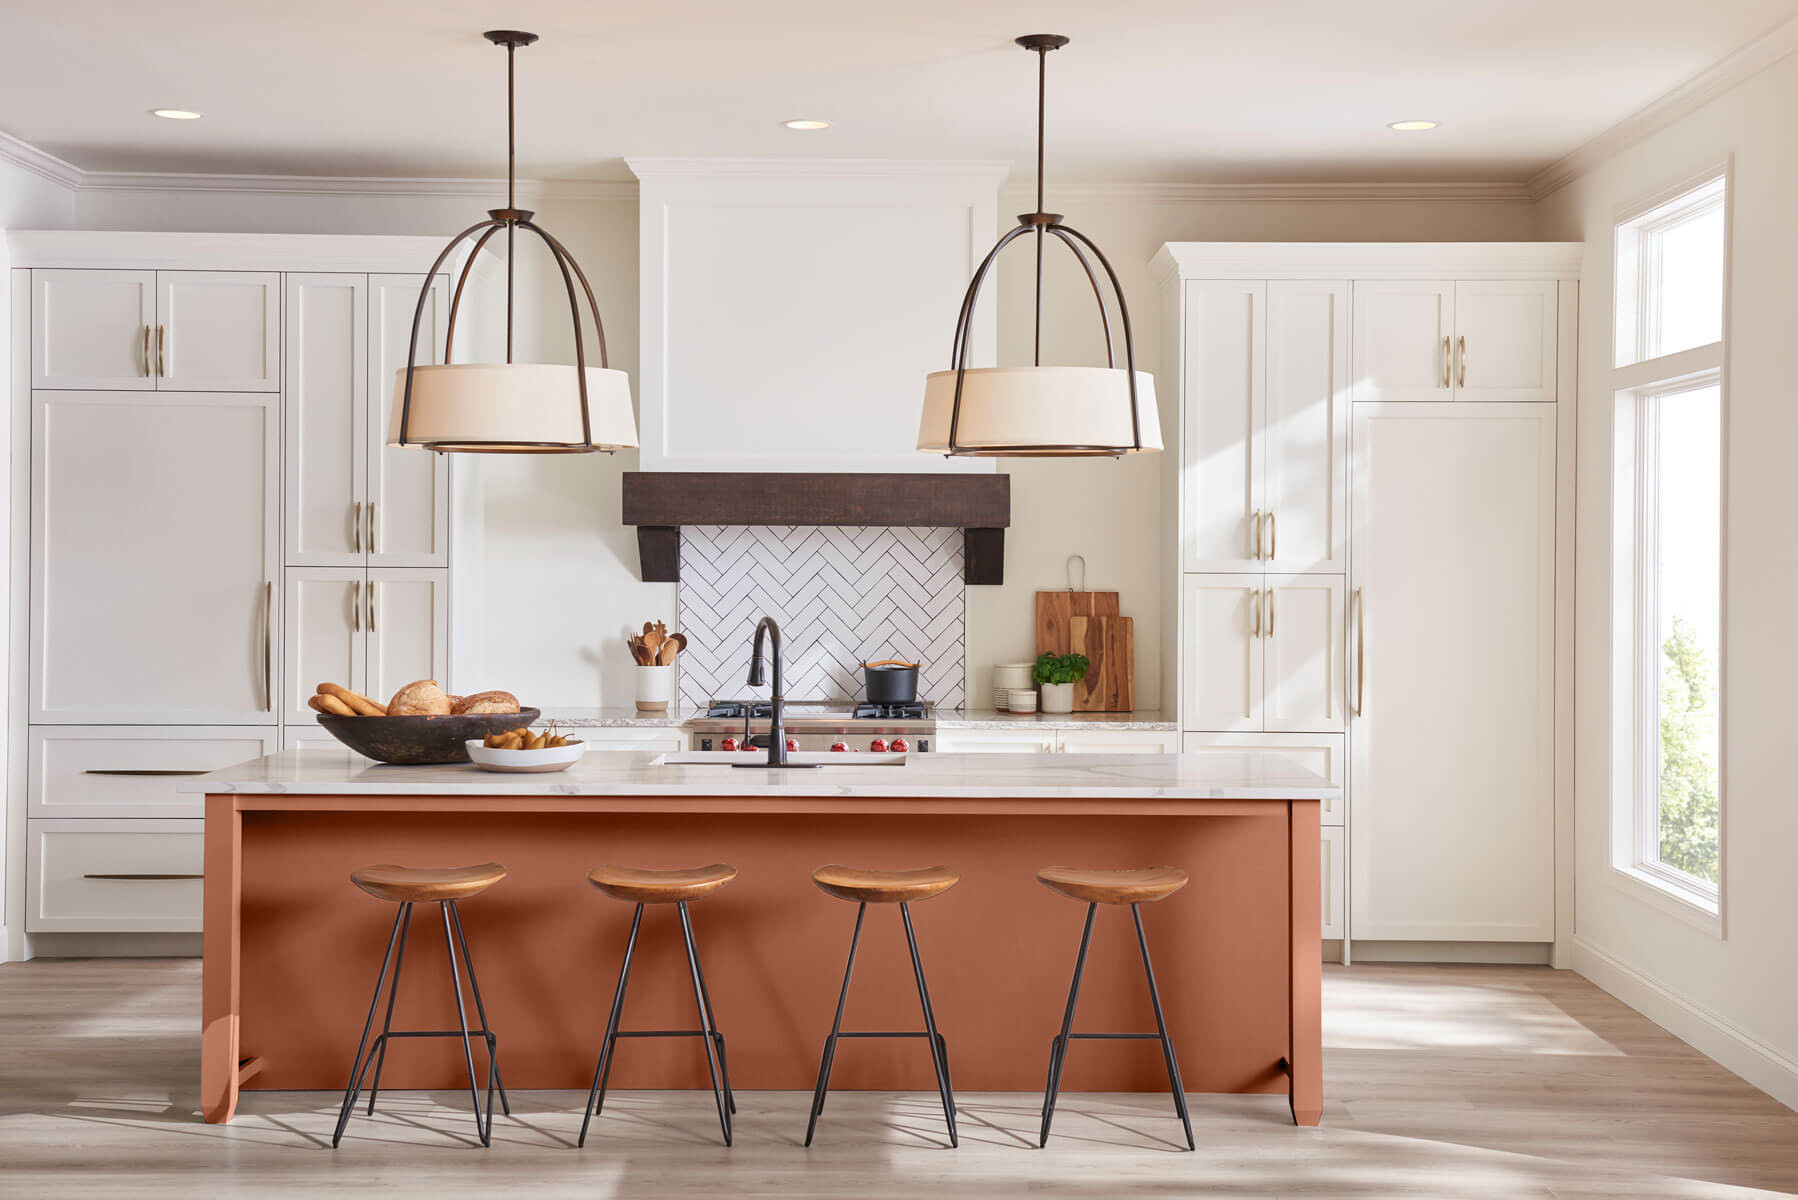 Kitchen Wall Colors
 Trending Kitchen Wall Colors For The Year 2019